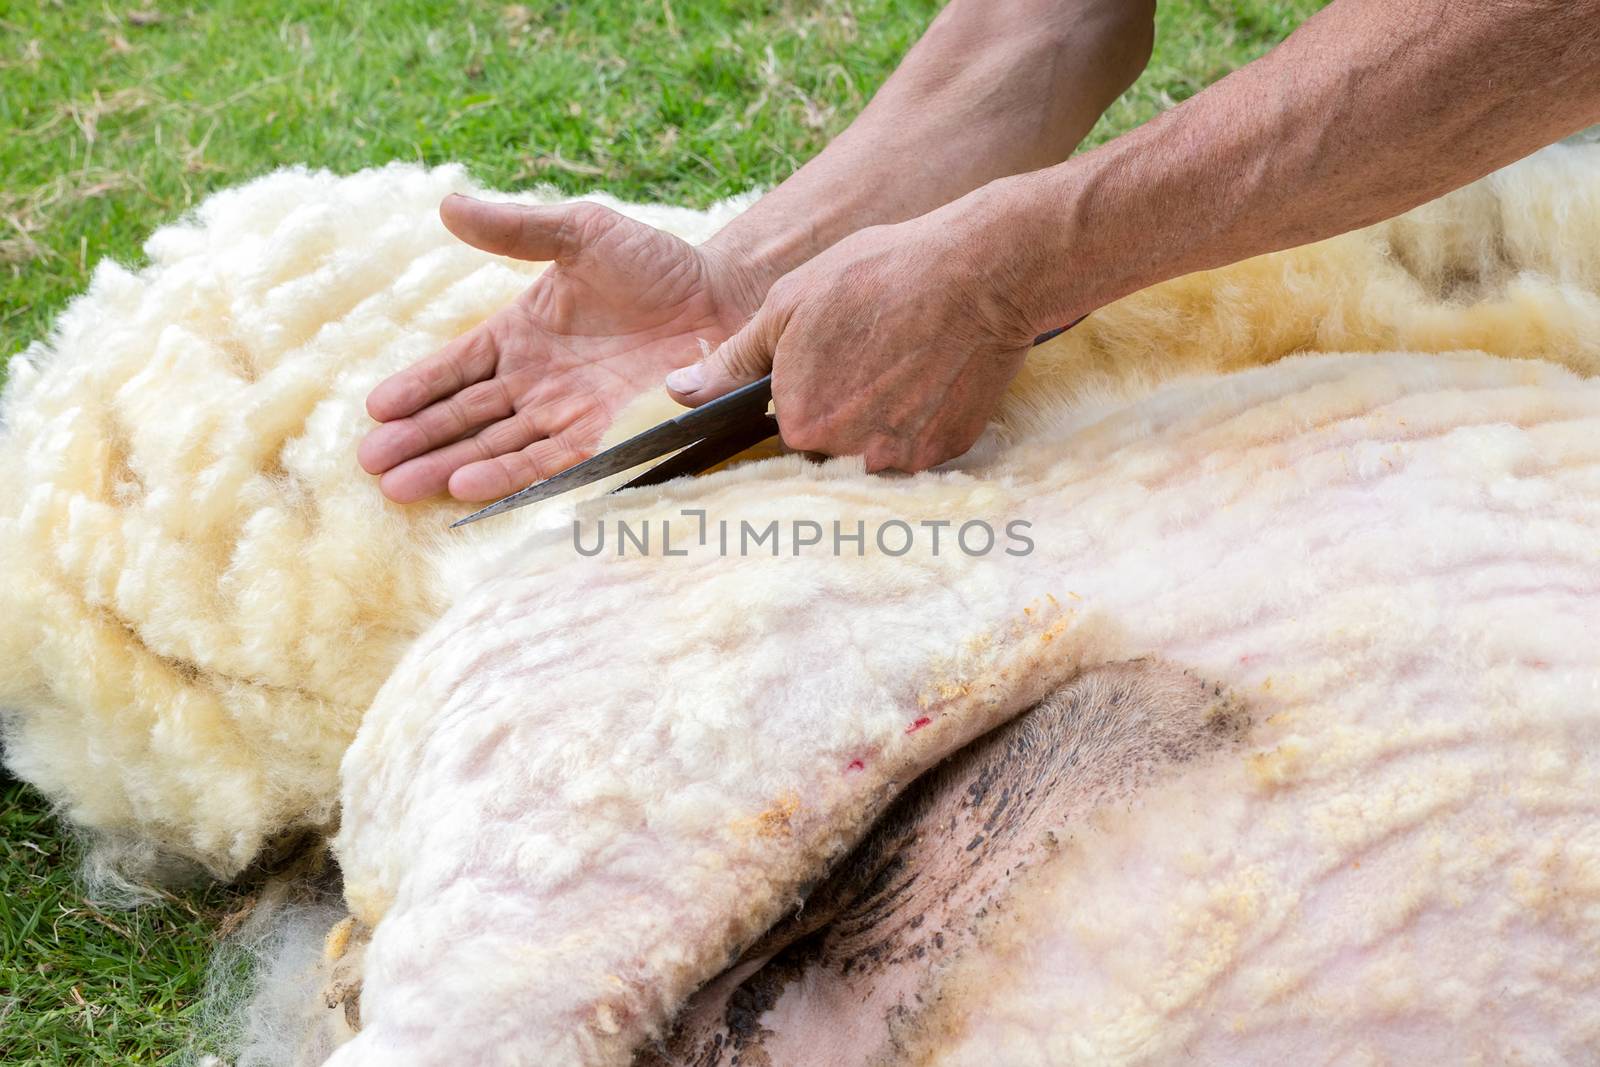 Hands of man sheaving wool from sheep with scissors